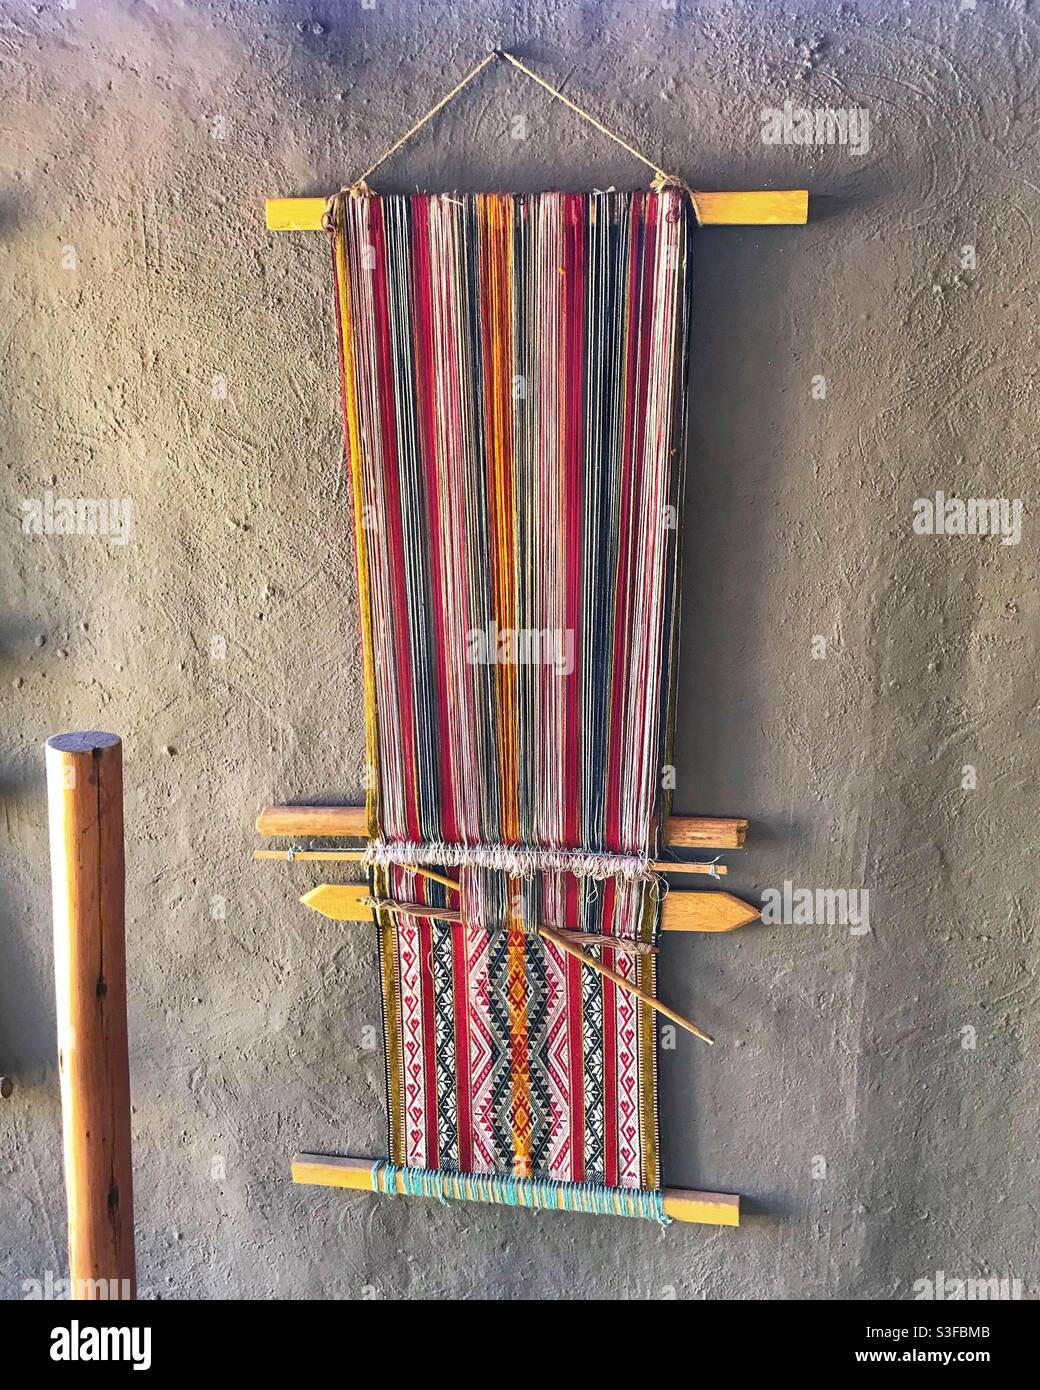 Demonstration of weaving project in progress in Arequipa, Peru Stock Photo